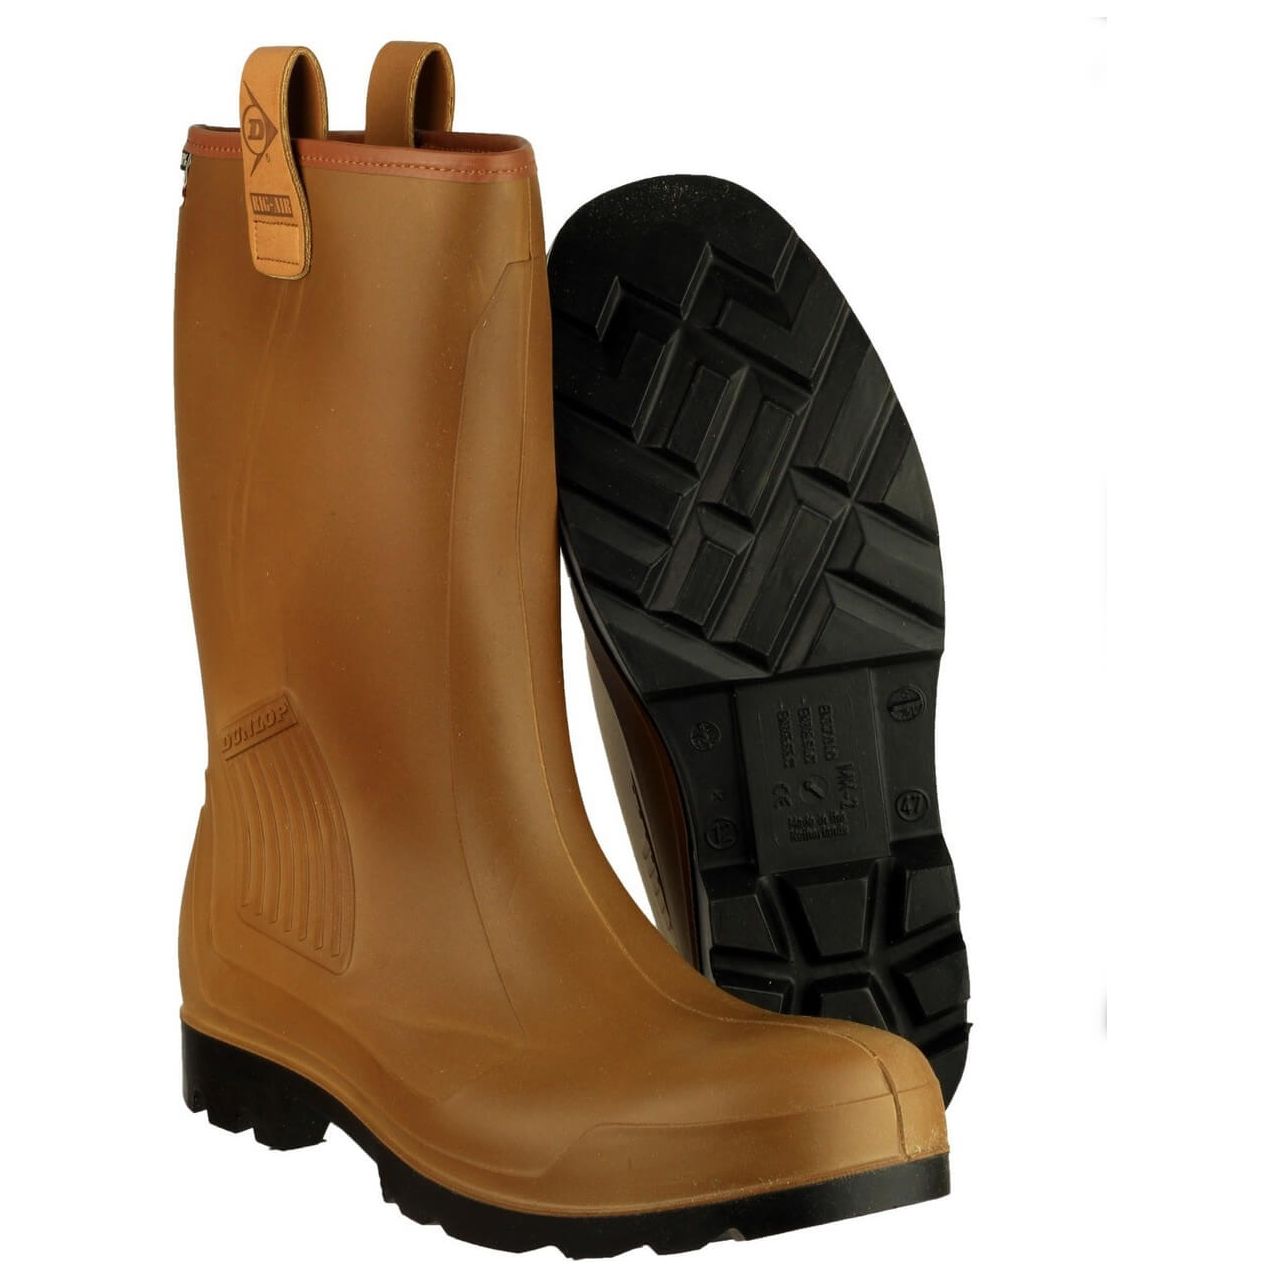 Dunlop Rig Air Fur-lined Safety Wellies-Brown-3